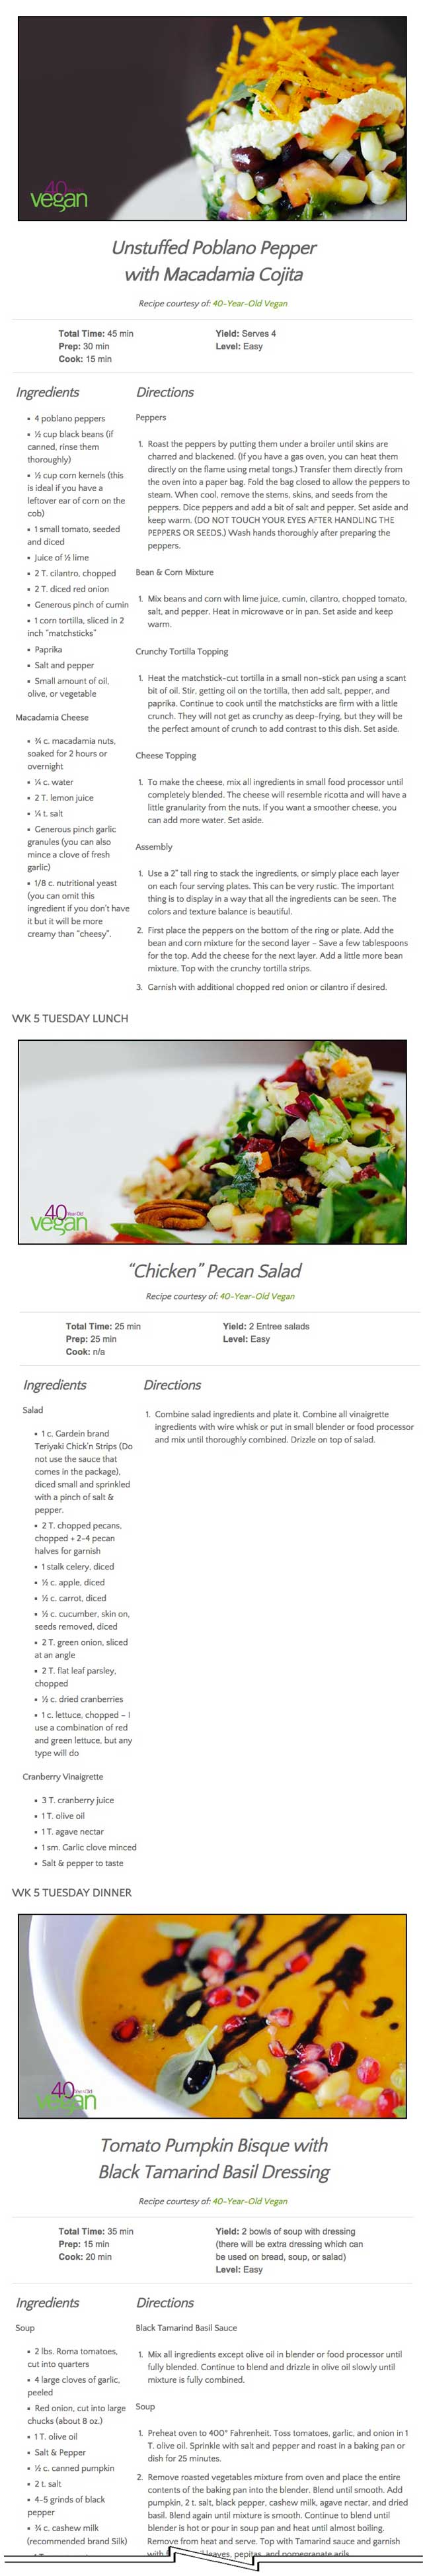  added three additional recipes from Sandra Sellani (Vegan Chef and author of What’s Your BQ?) to the Food Self-sufficiency Transition Plan – These recipes are: Unstuffed Poblano, Tomato Pumpkin Bisque, and “Chicken” Chopped Salad with Cranberry Vinaigrette: